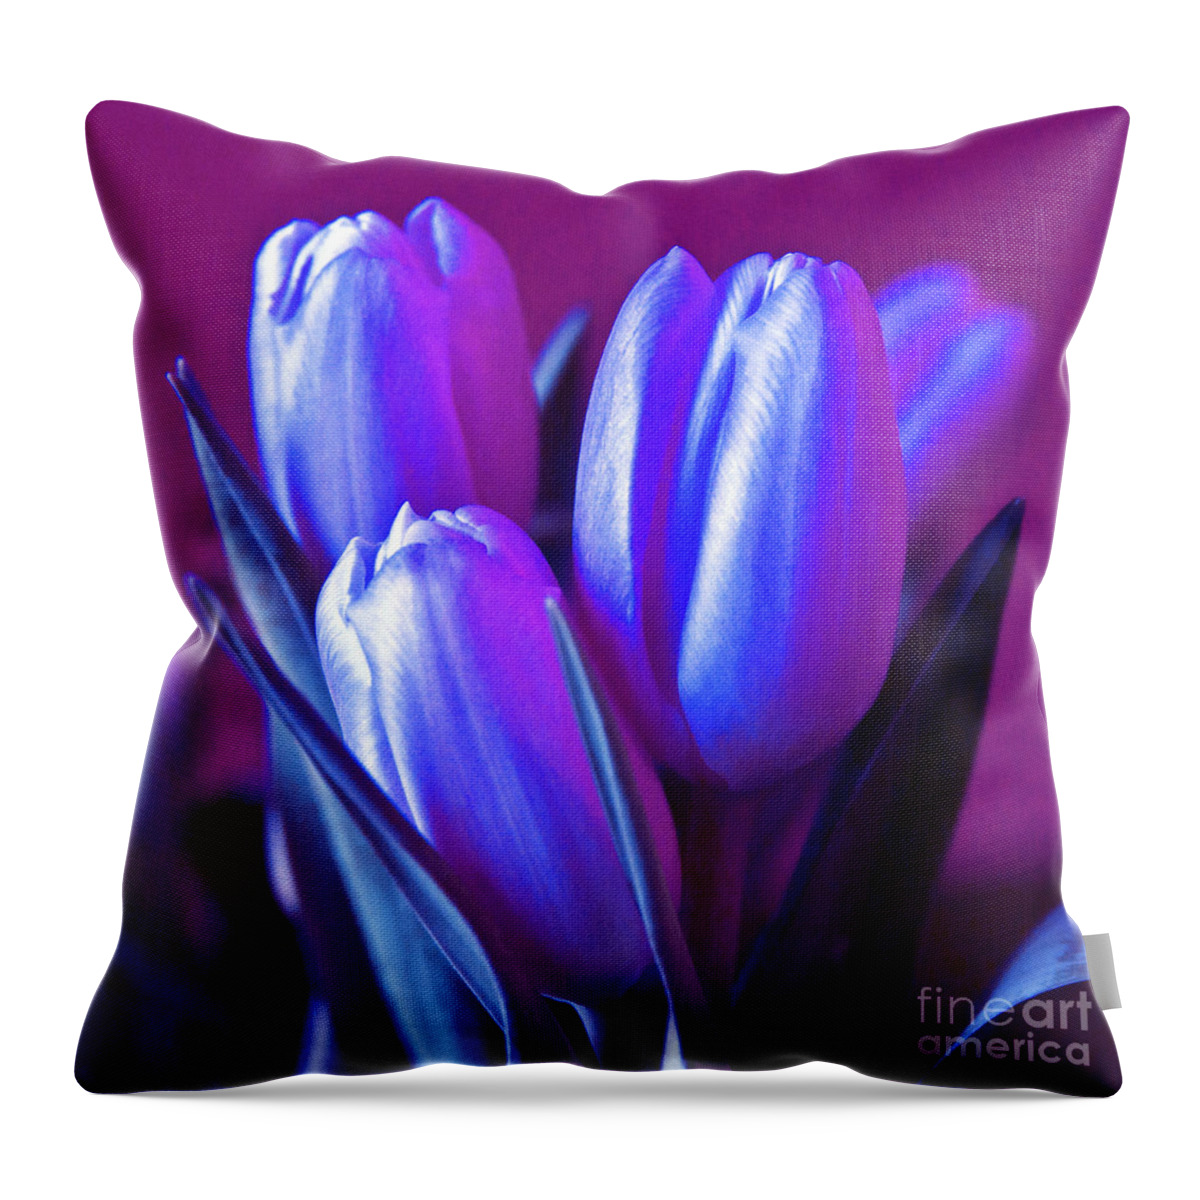 Violet Poetry Of Spring Throw Pillow featuring the photograph Violet Poetry of Spring by Silva Wischeropp